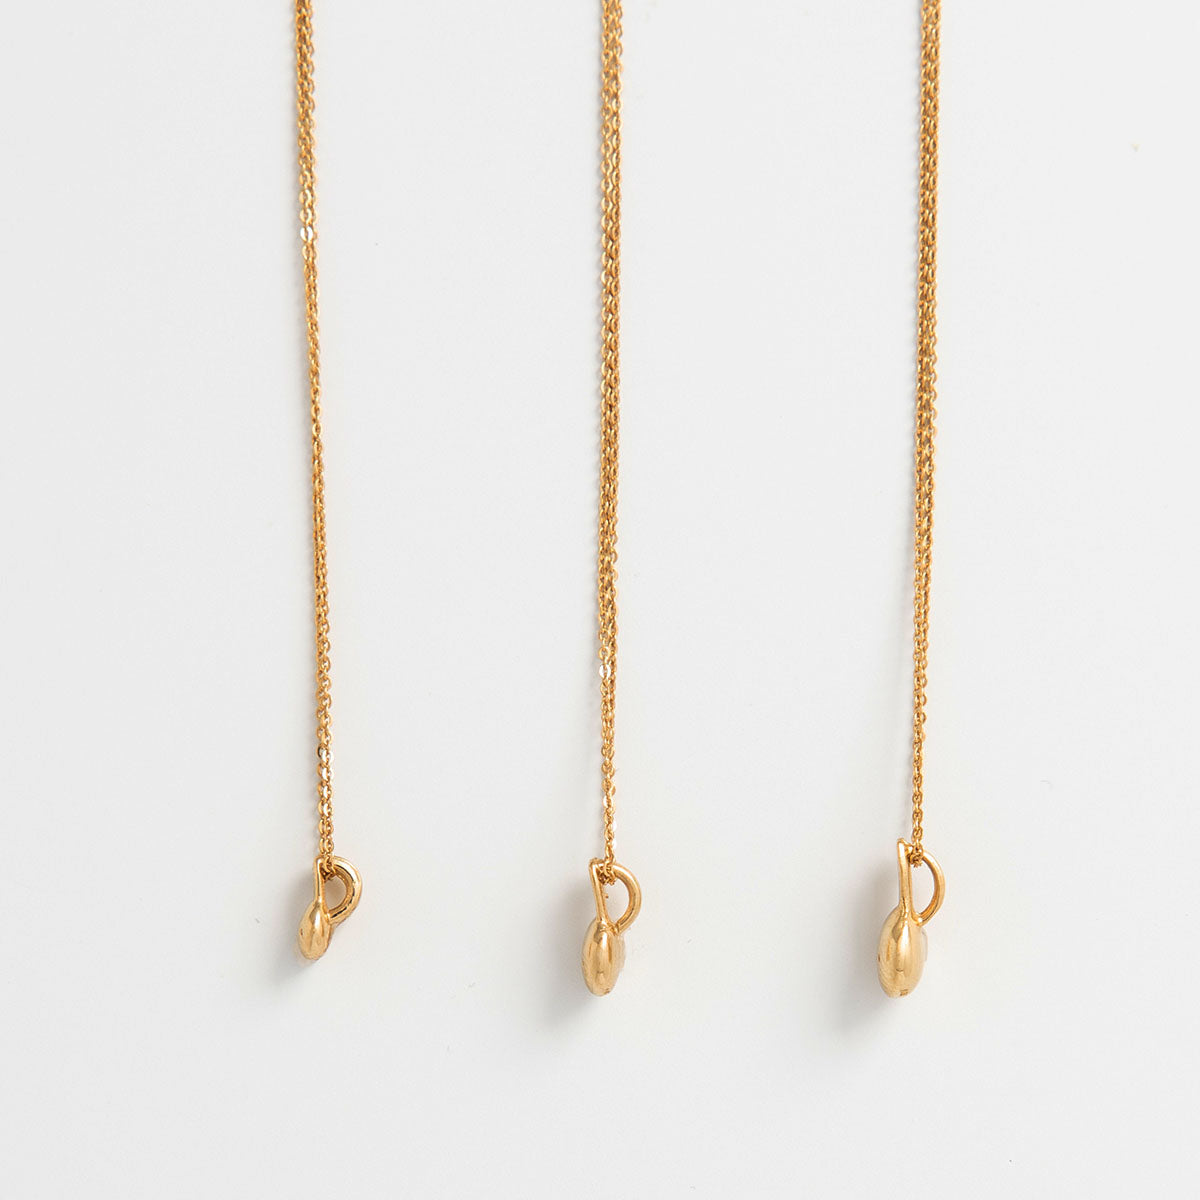 Miffy Large Head Necklace (18ct Gold Vermeil)